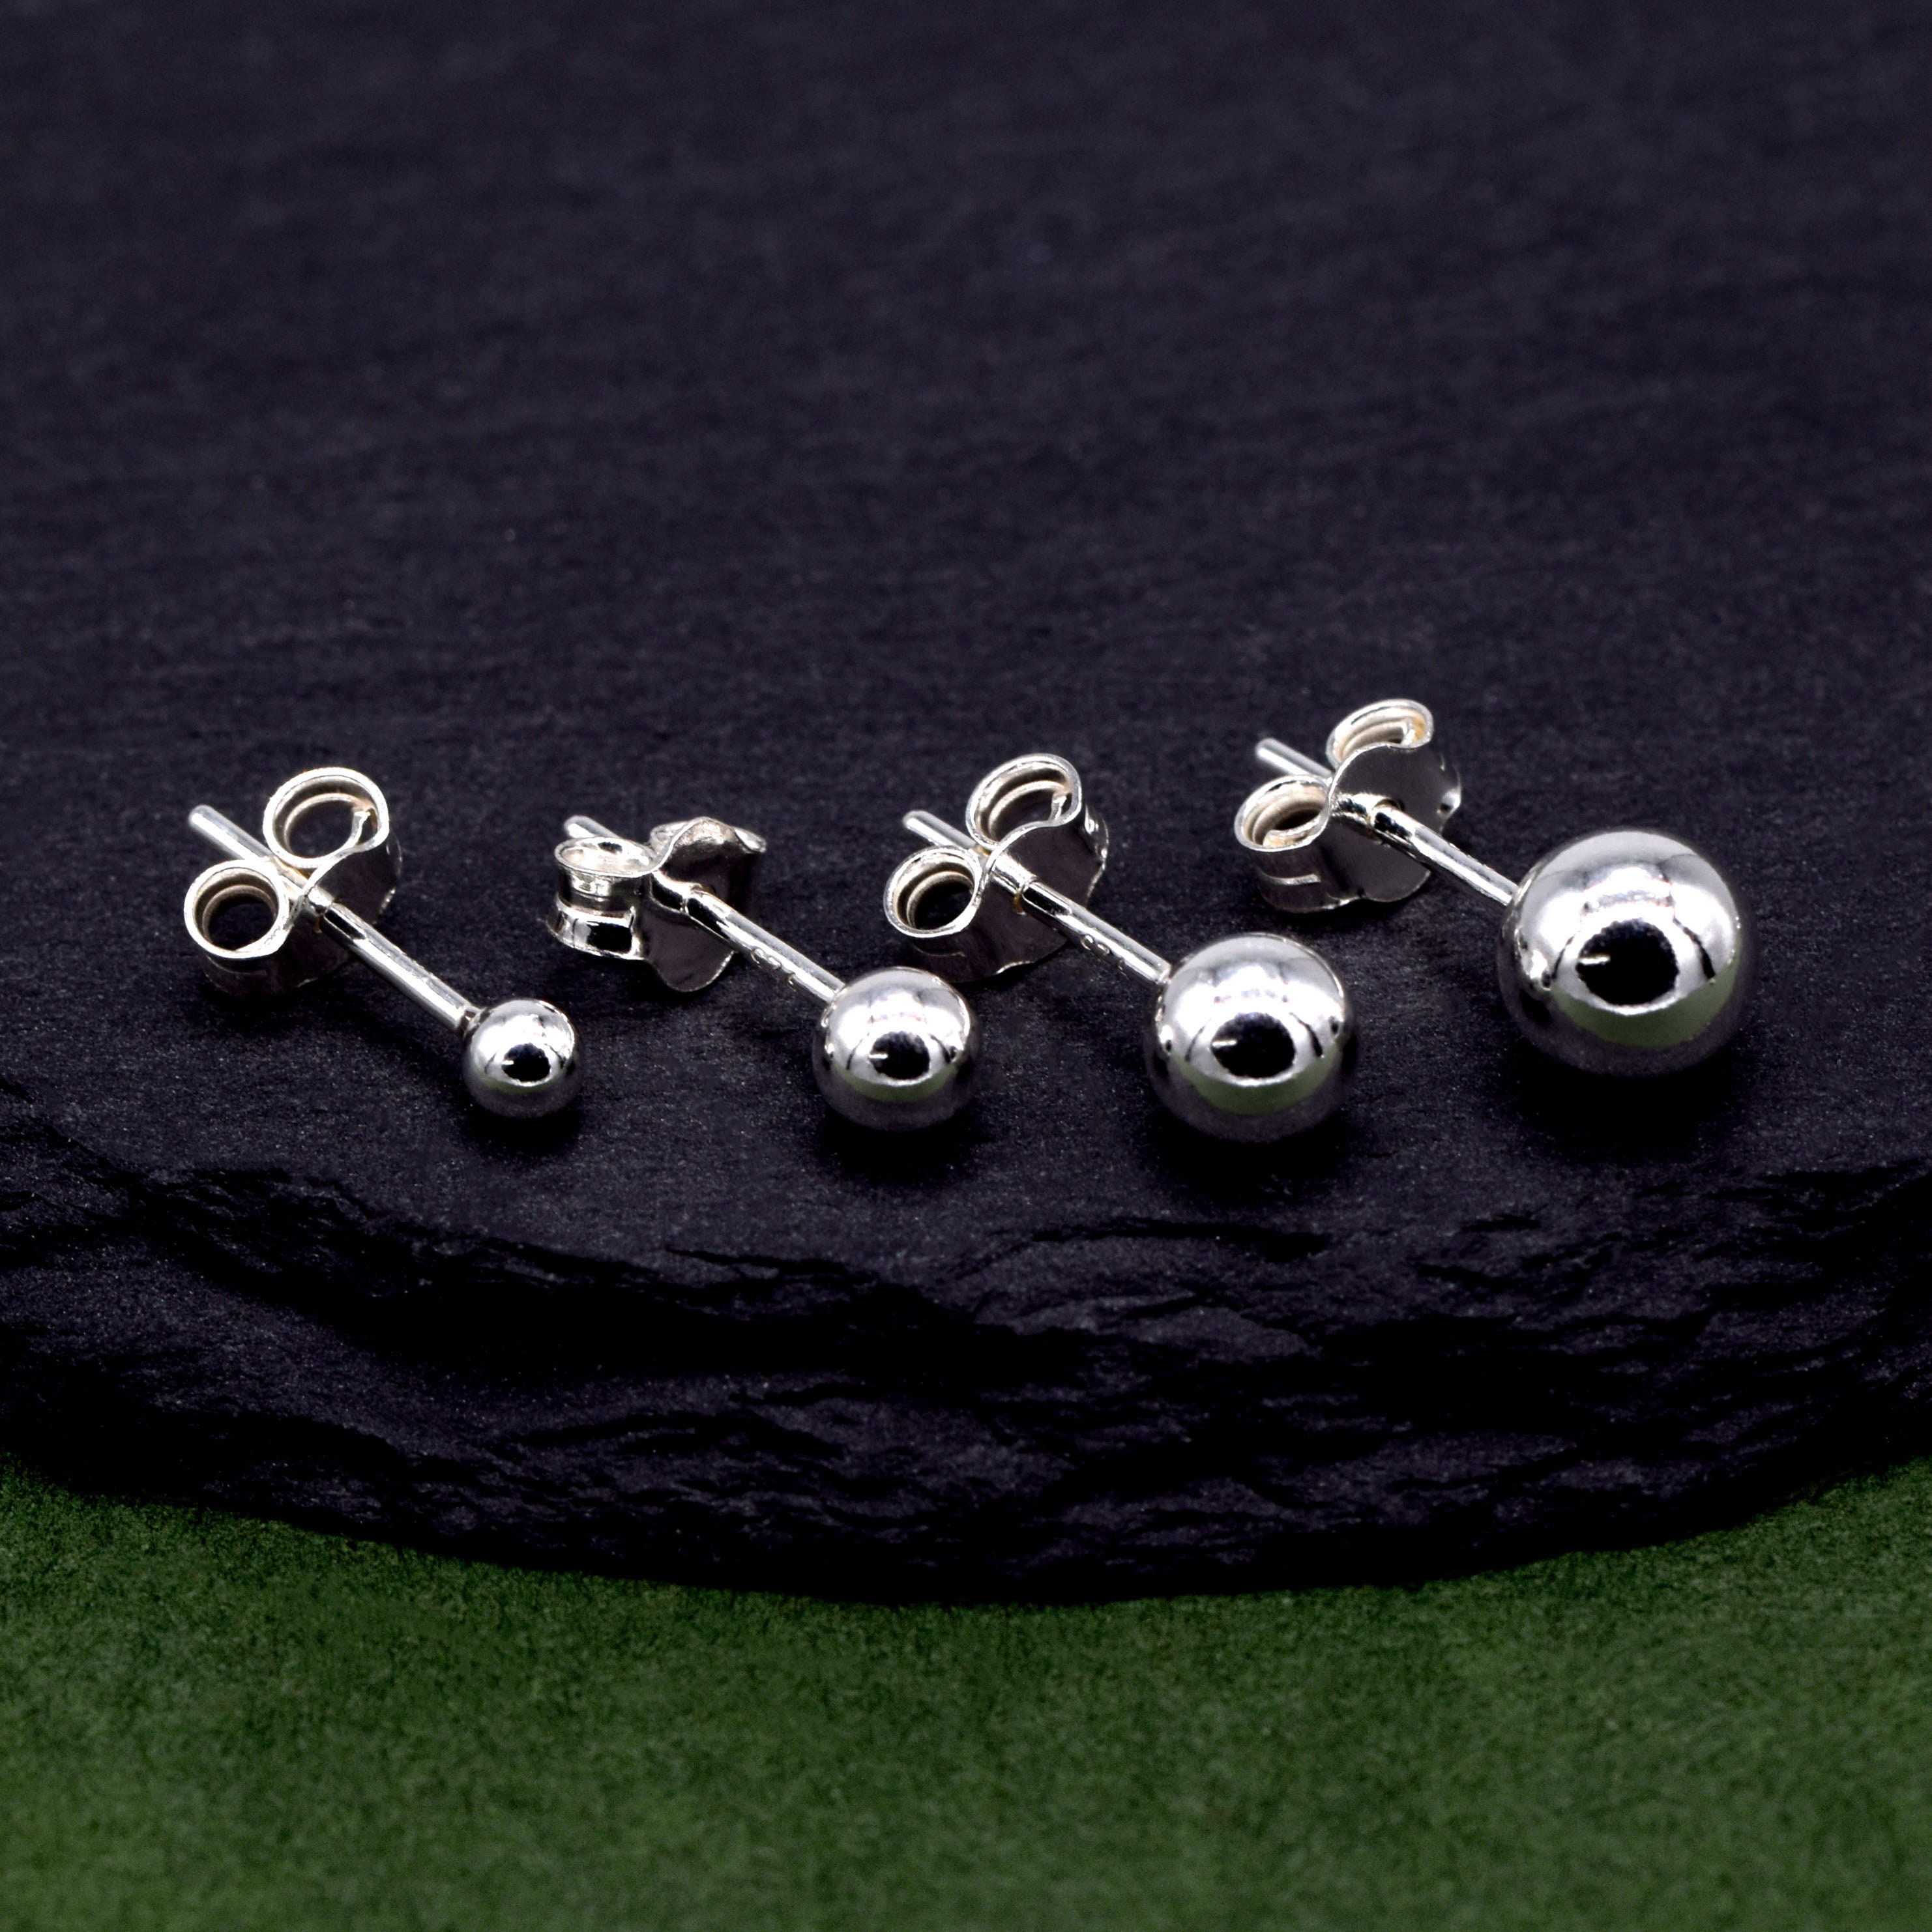 Pair of Genuine 925 Sterling Silver Ball Ear Studs Available in